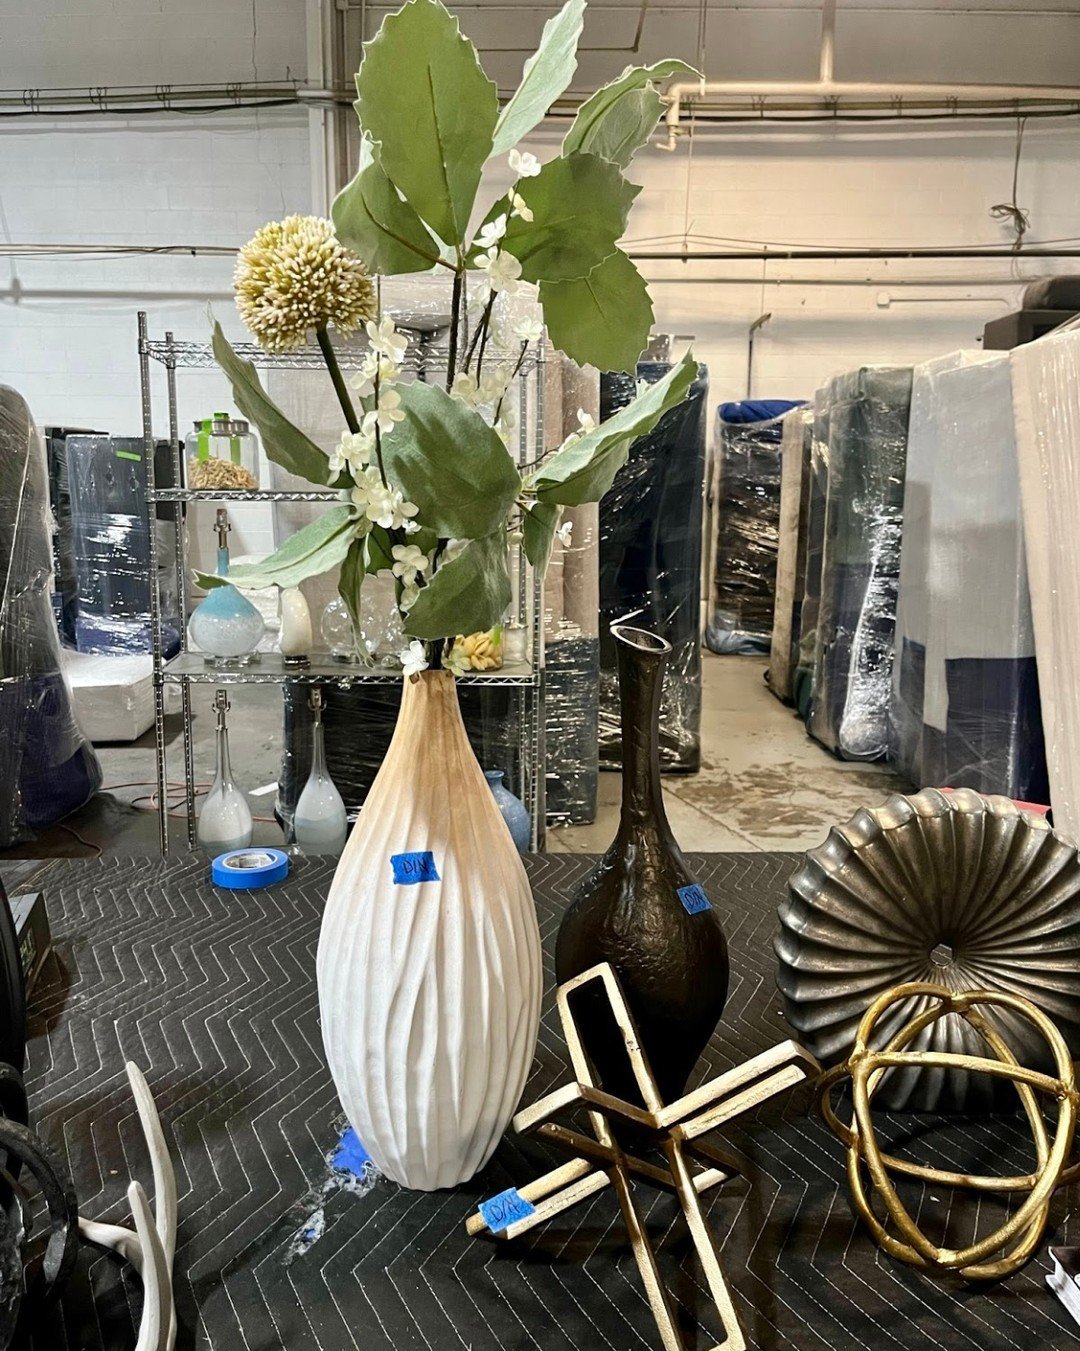 Every staging project involves a trip to our warehouse where the team carefully curates every piece of furniture, accent, and accessory to fit our vision and strategy. 

Double tap if you want to see more behind-the-scenes of the Signature Staging te